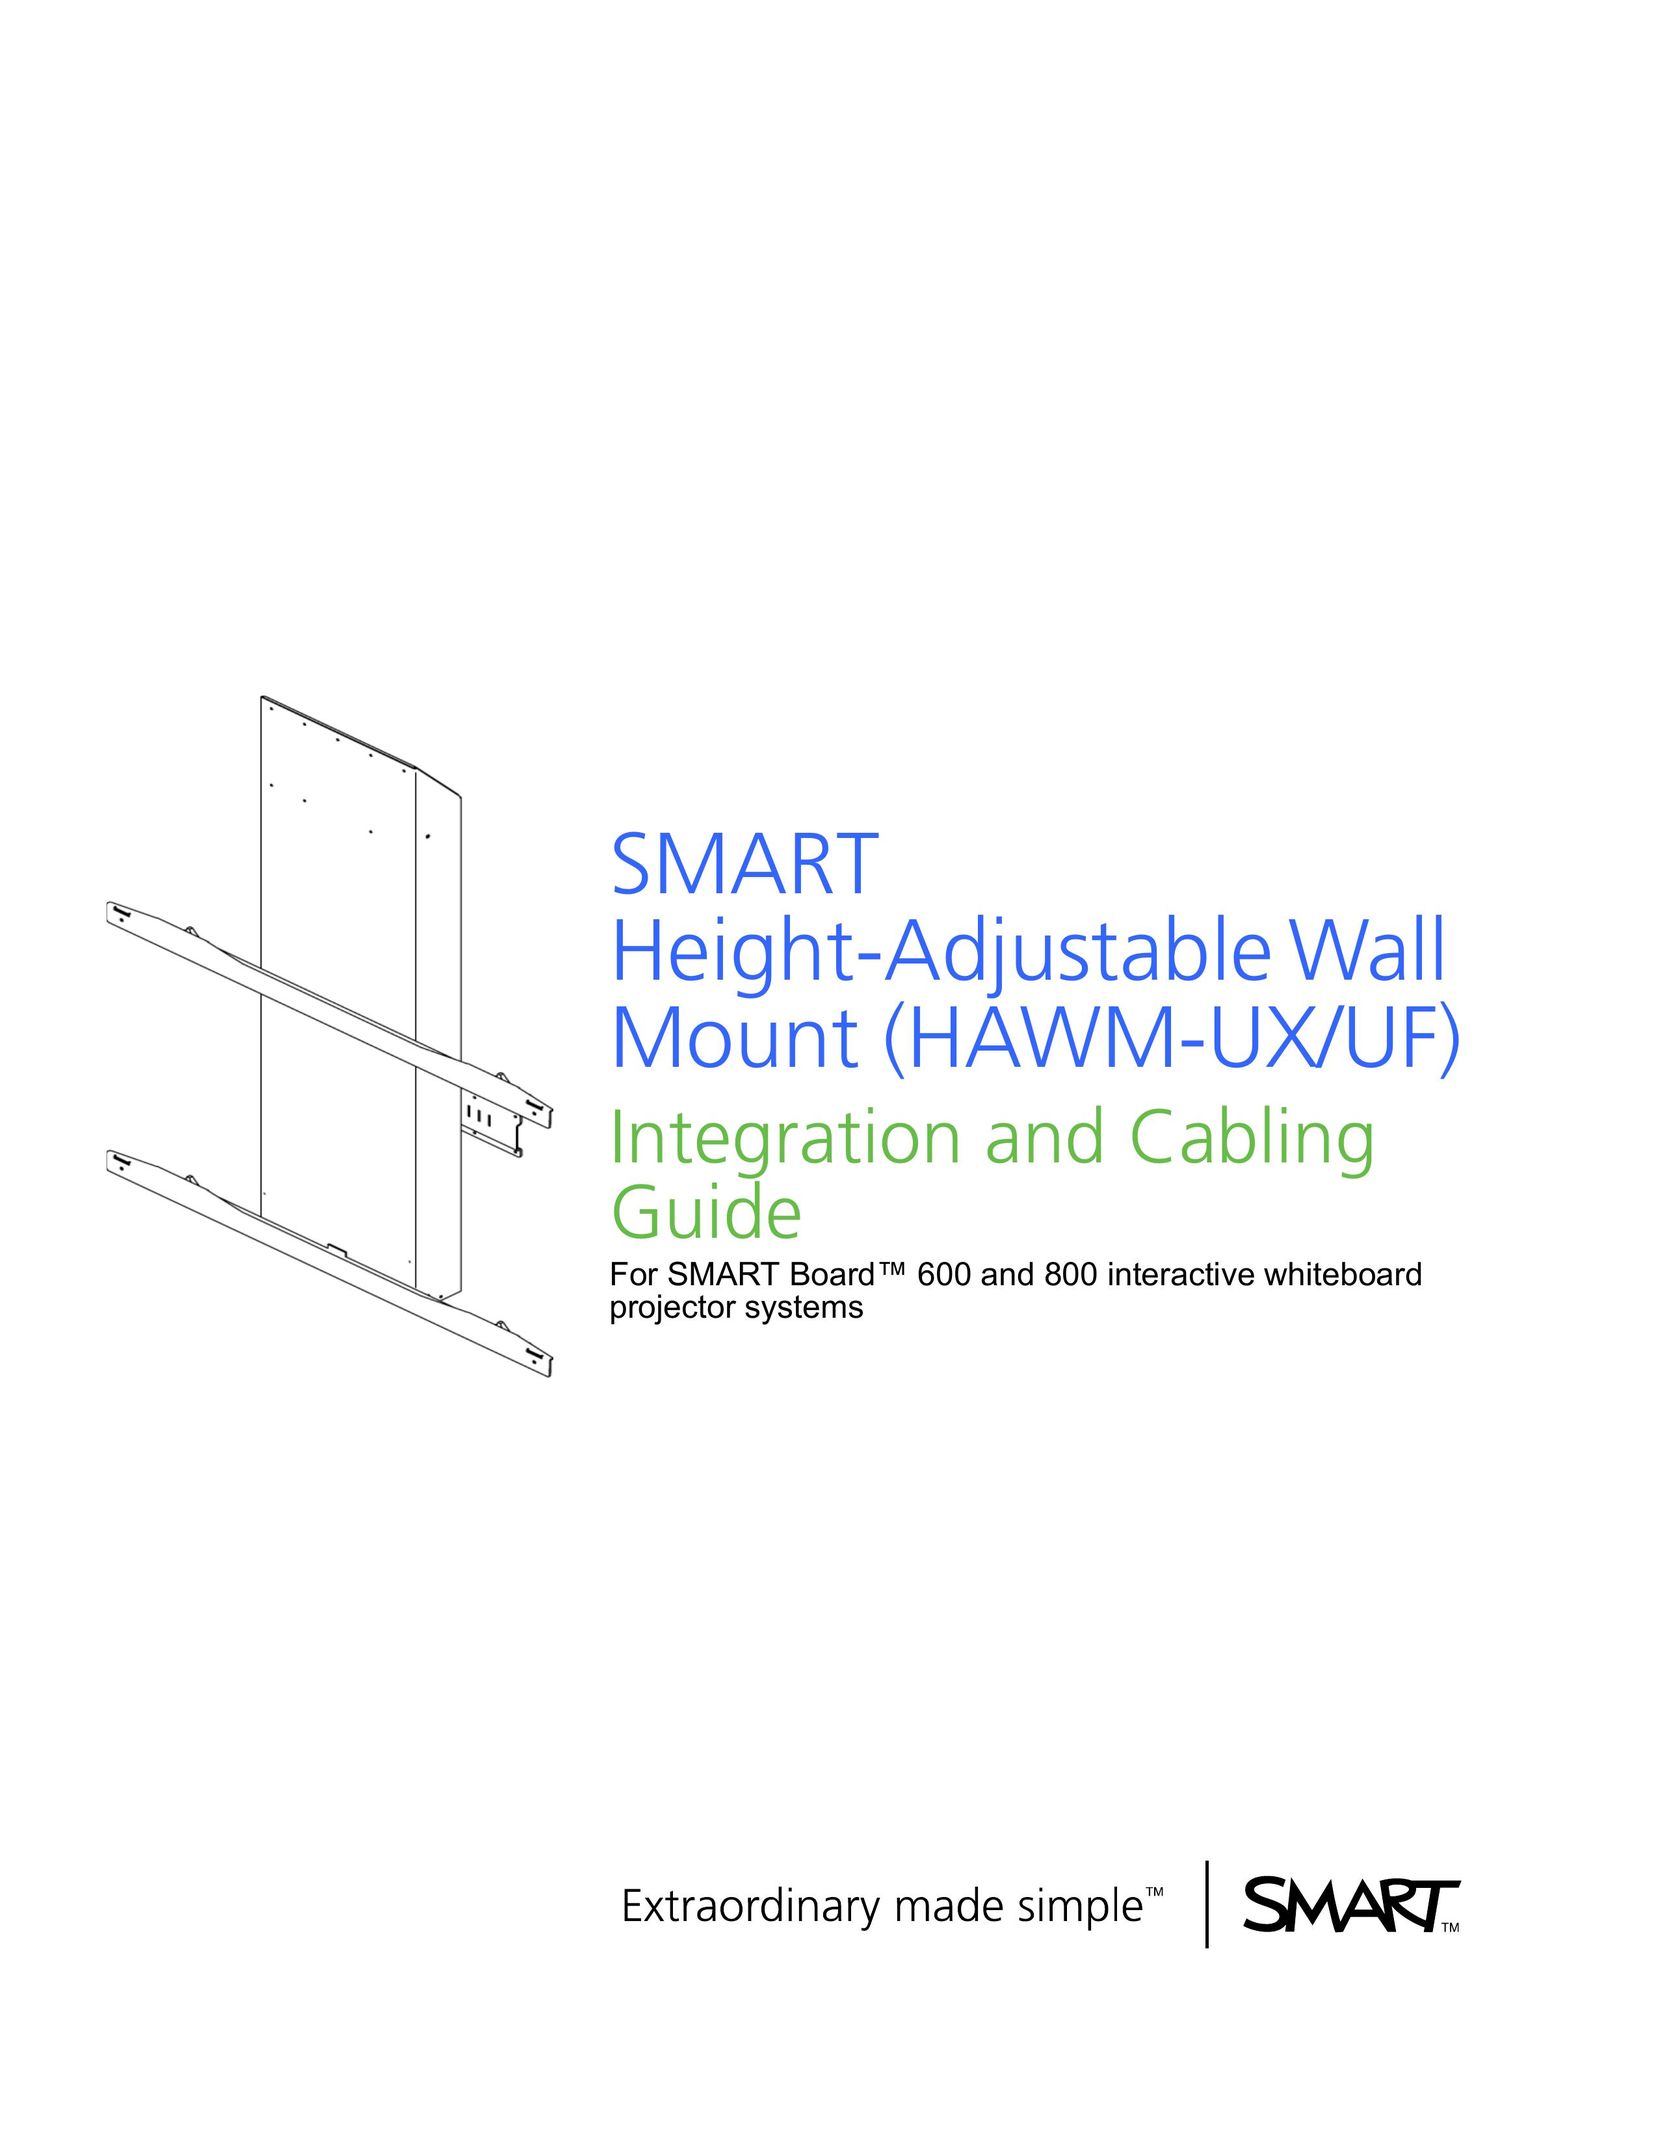 Smart Inventions HAWM-UX/UF TV Mount User Manual